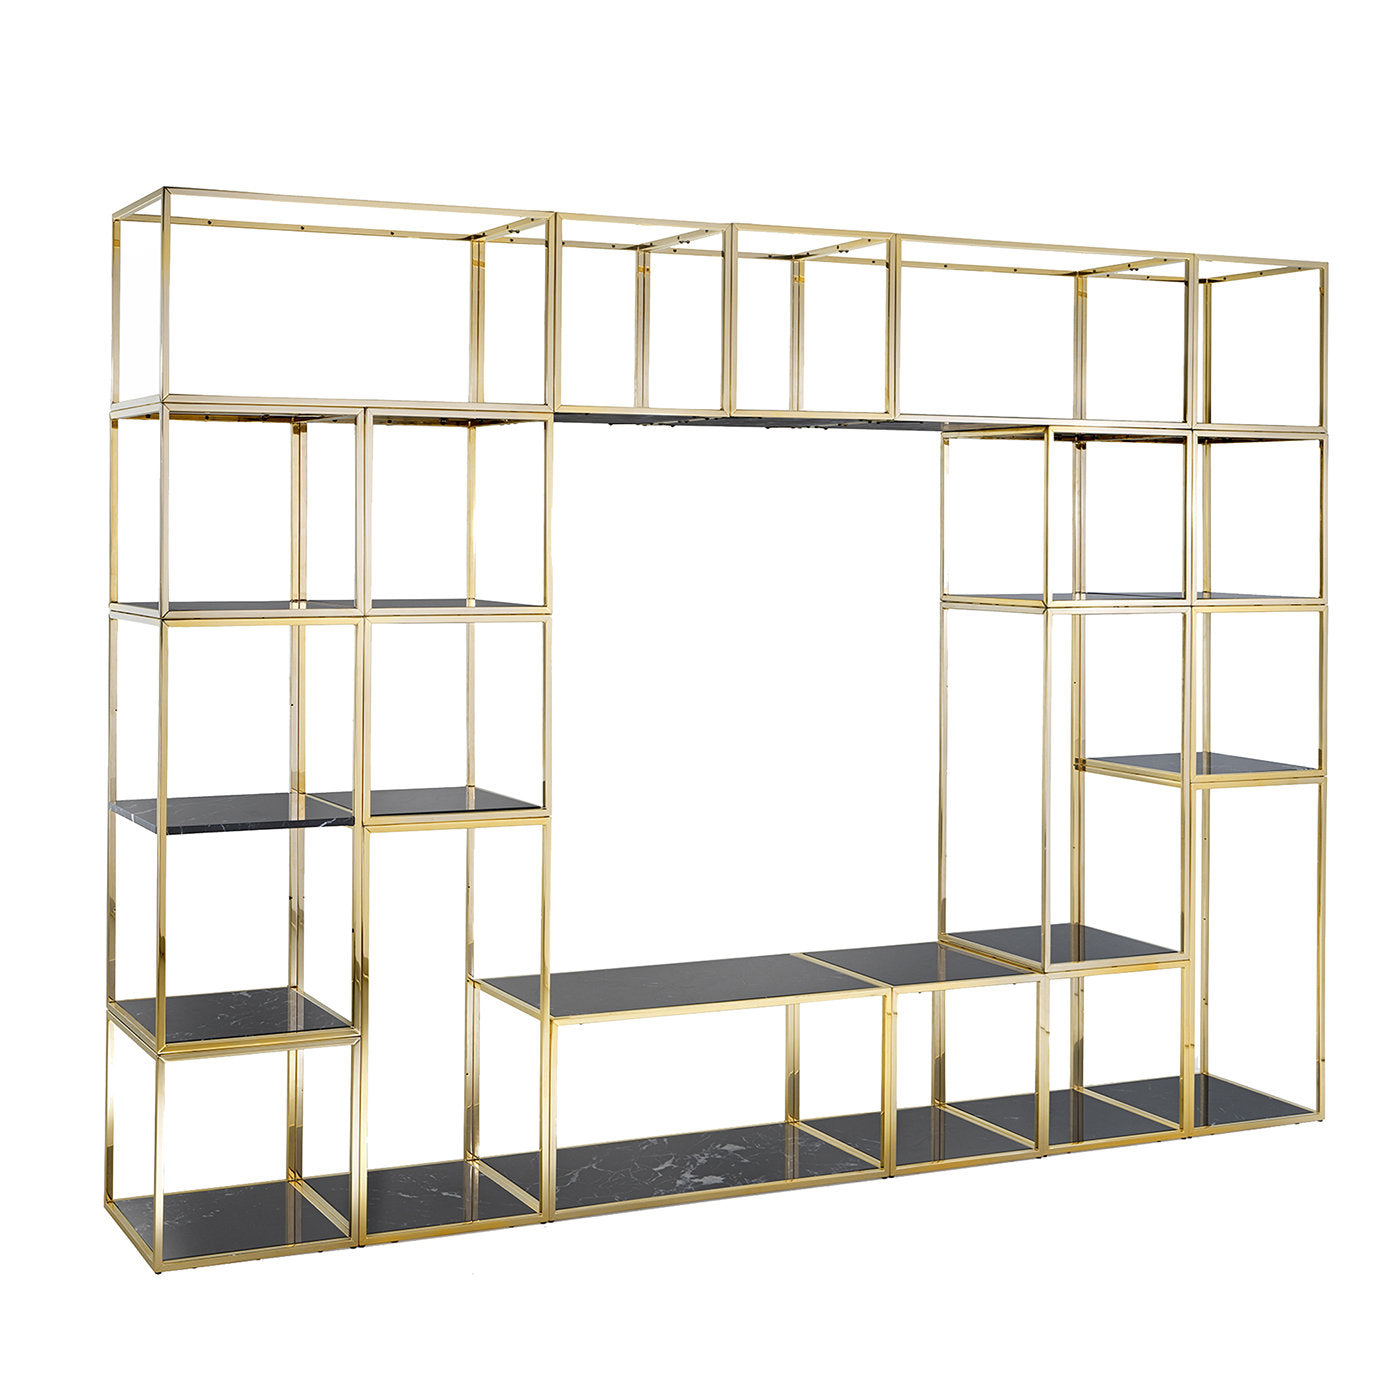 Gold Hyper-Cube Bookcase #1 - Main view